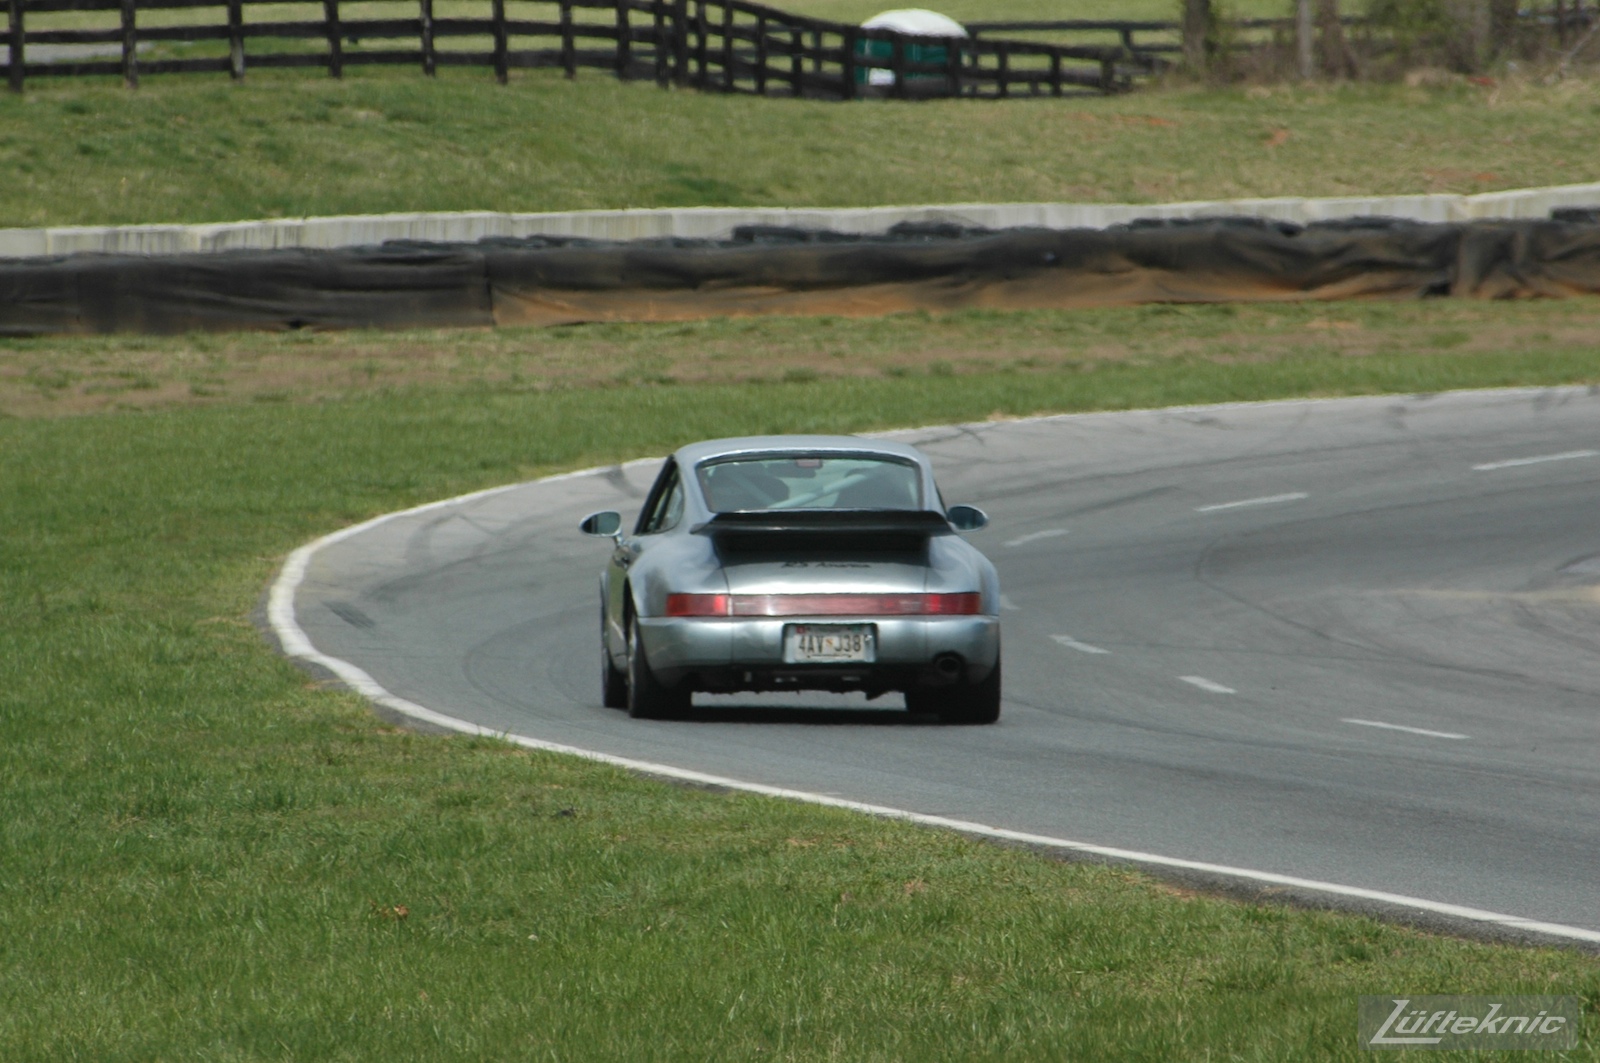 The 964 RS America on track for the first time after the accident, going down the hill at Summit Point